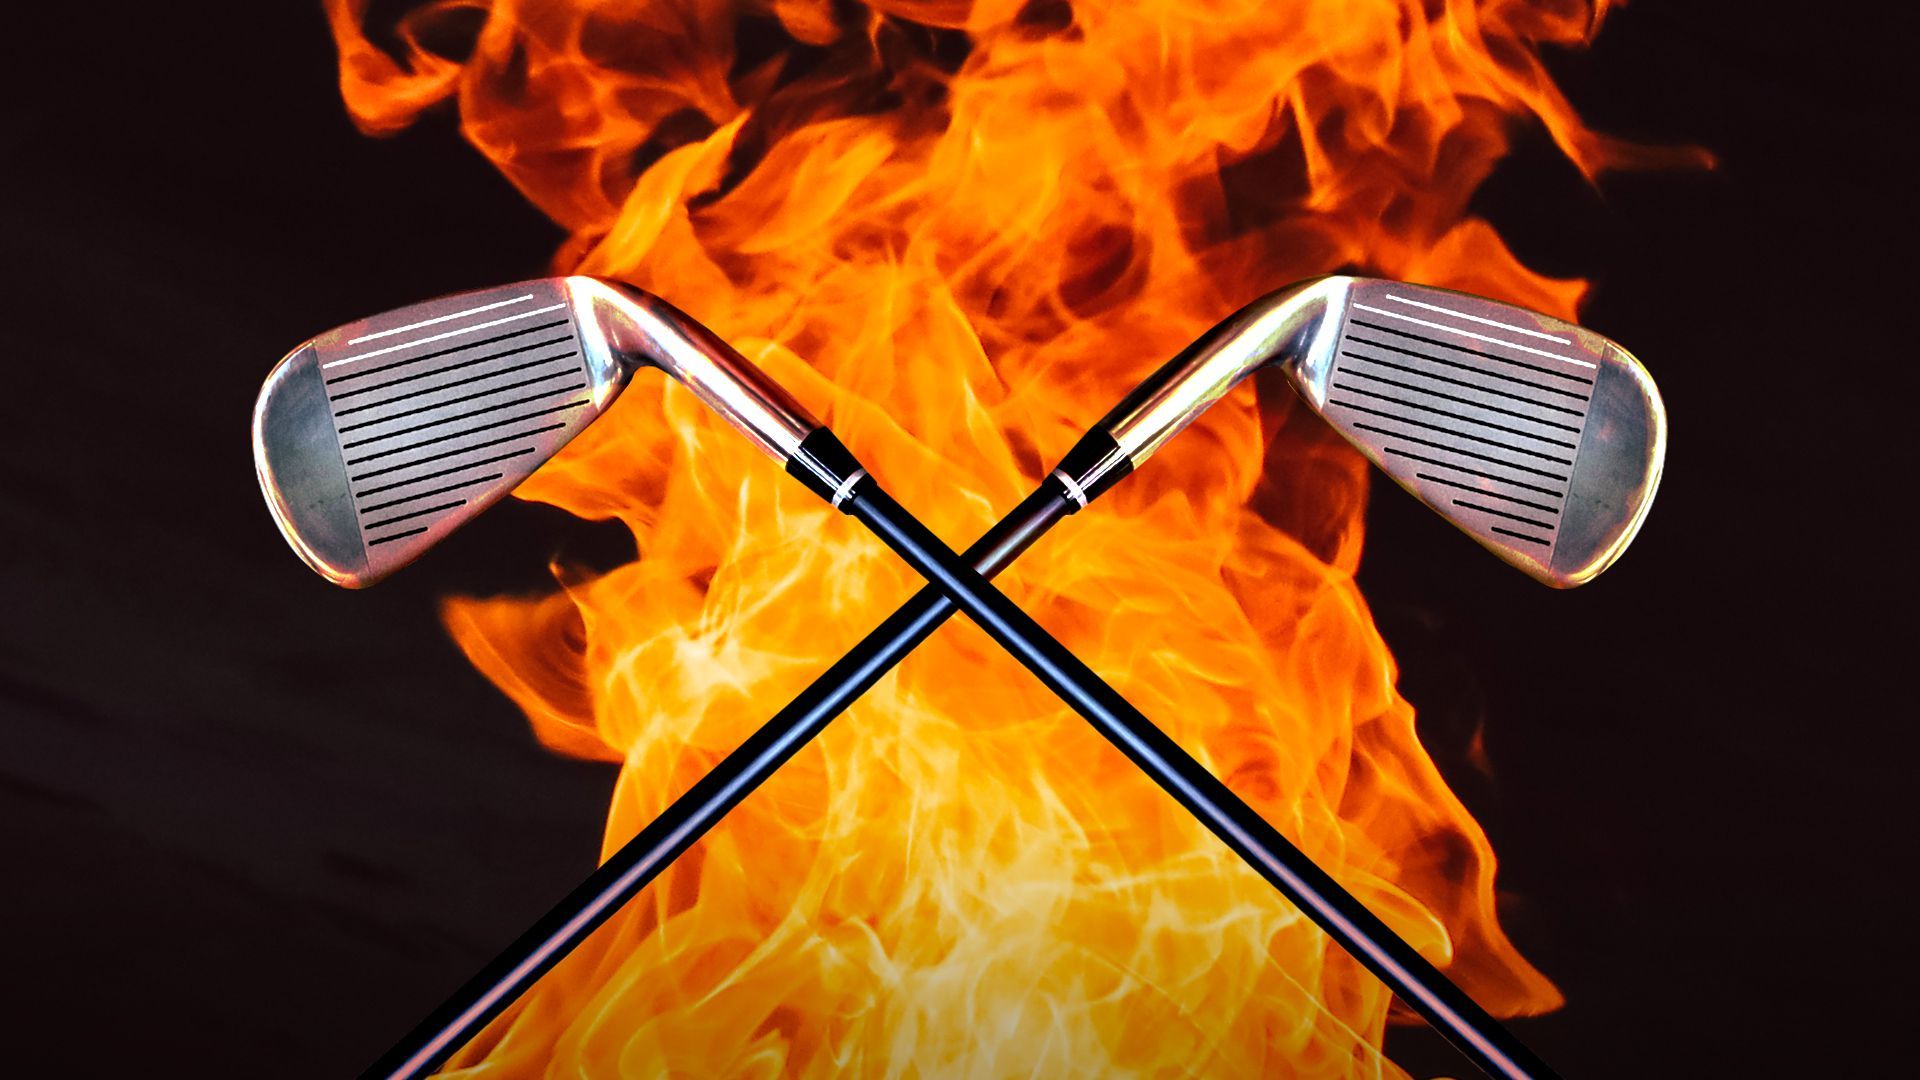 Illustration of two golf clubs crossed in front of a large fire